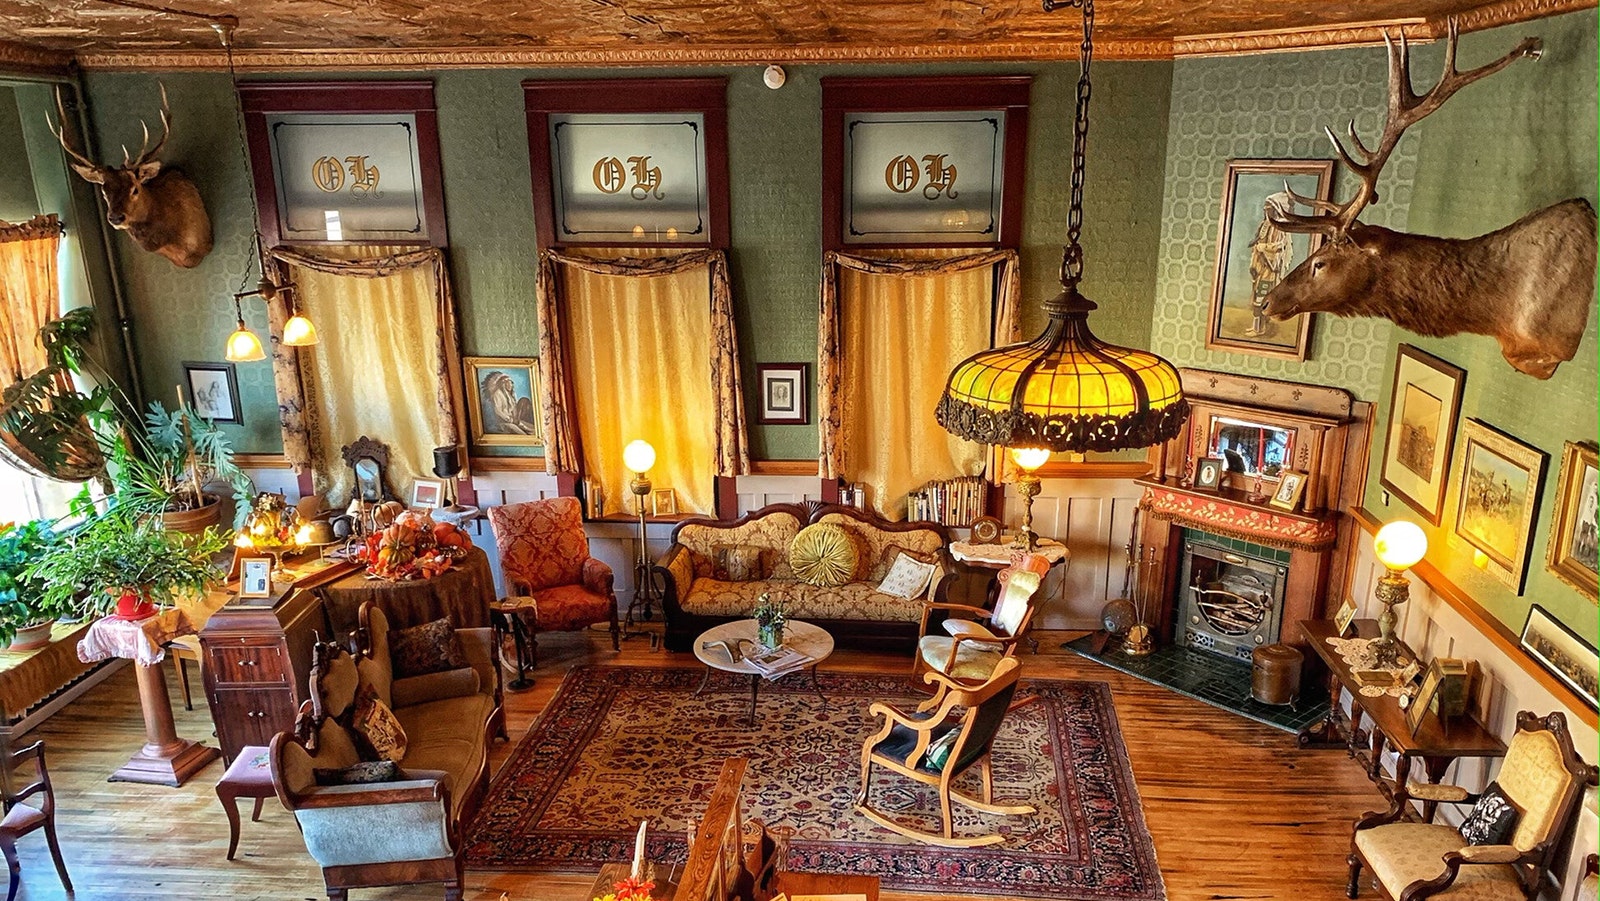 The lobby at the Occidental Hotel in Buffalo, Wyoming, is eclectic, elegant and 100% Old West Wyoming.